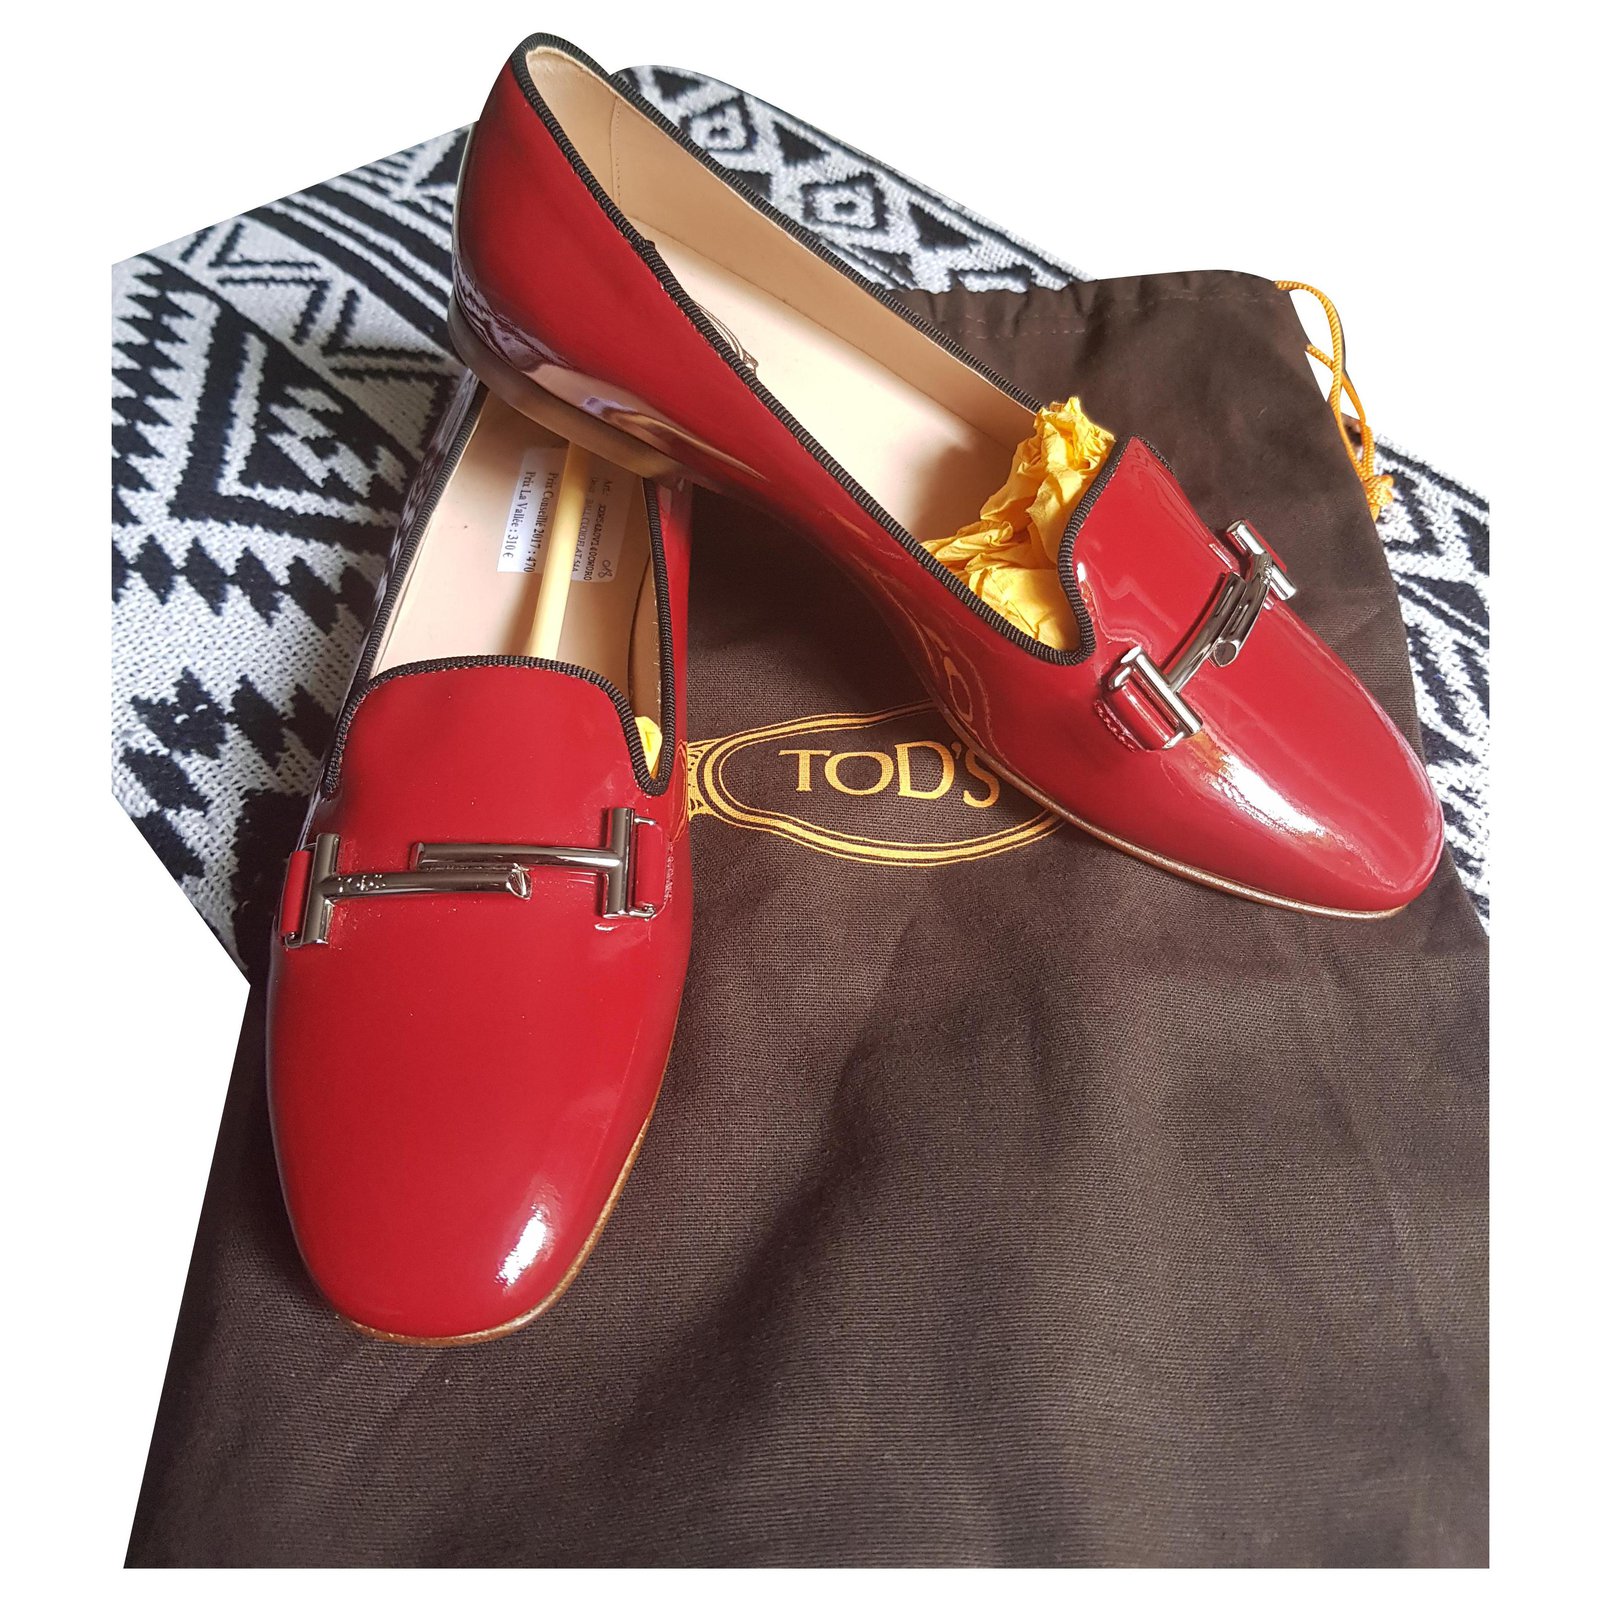 tods flats